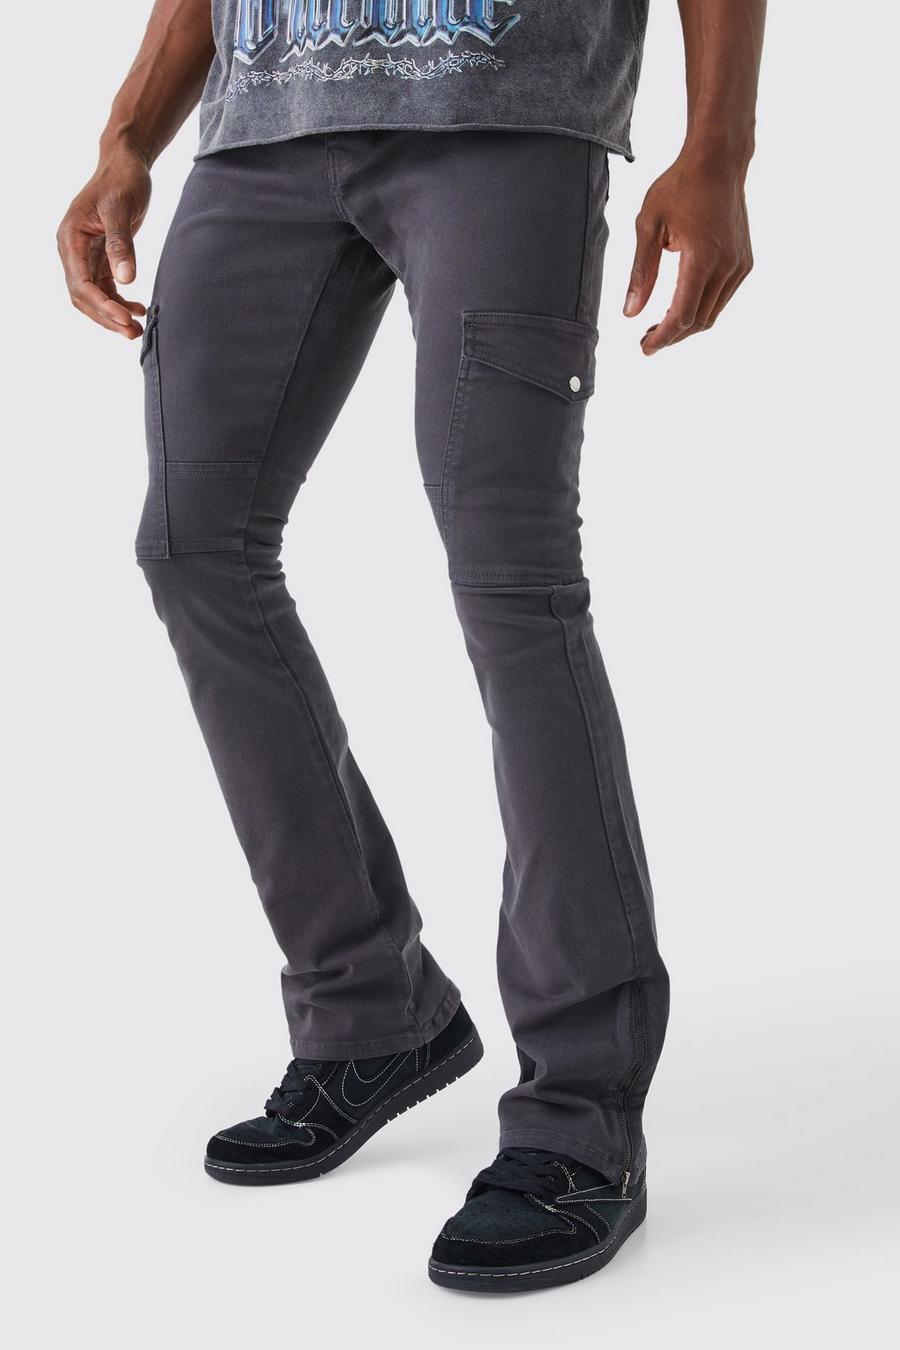 Charcoal grey Fixed Waist Skinny Stacked Zip Gusset Cargo Trouser